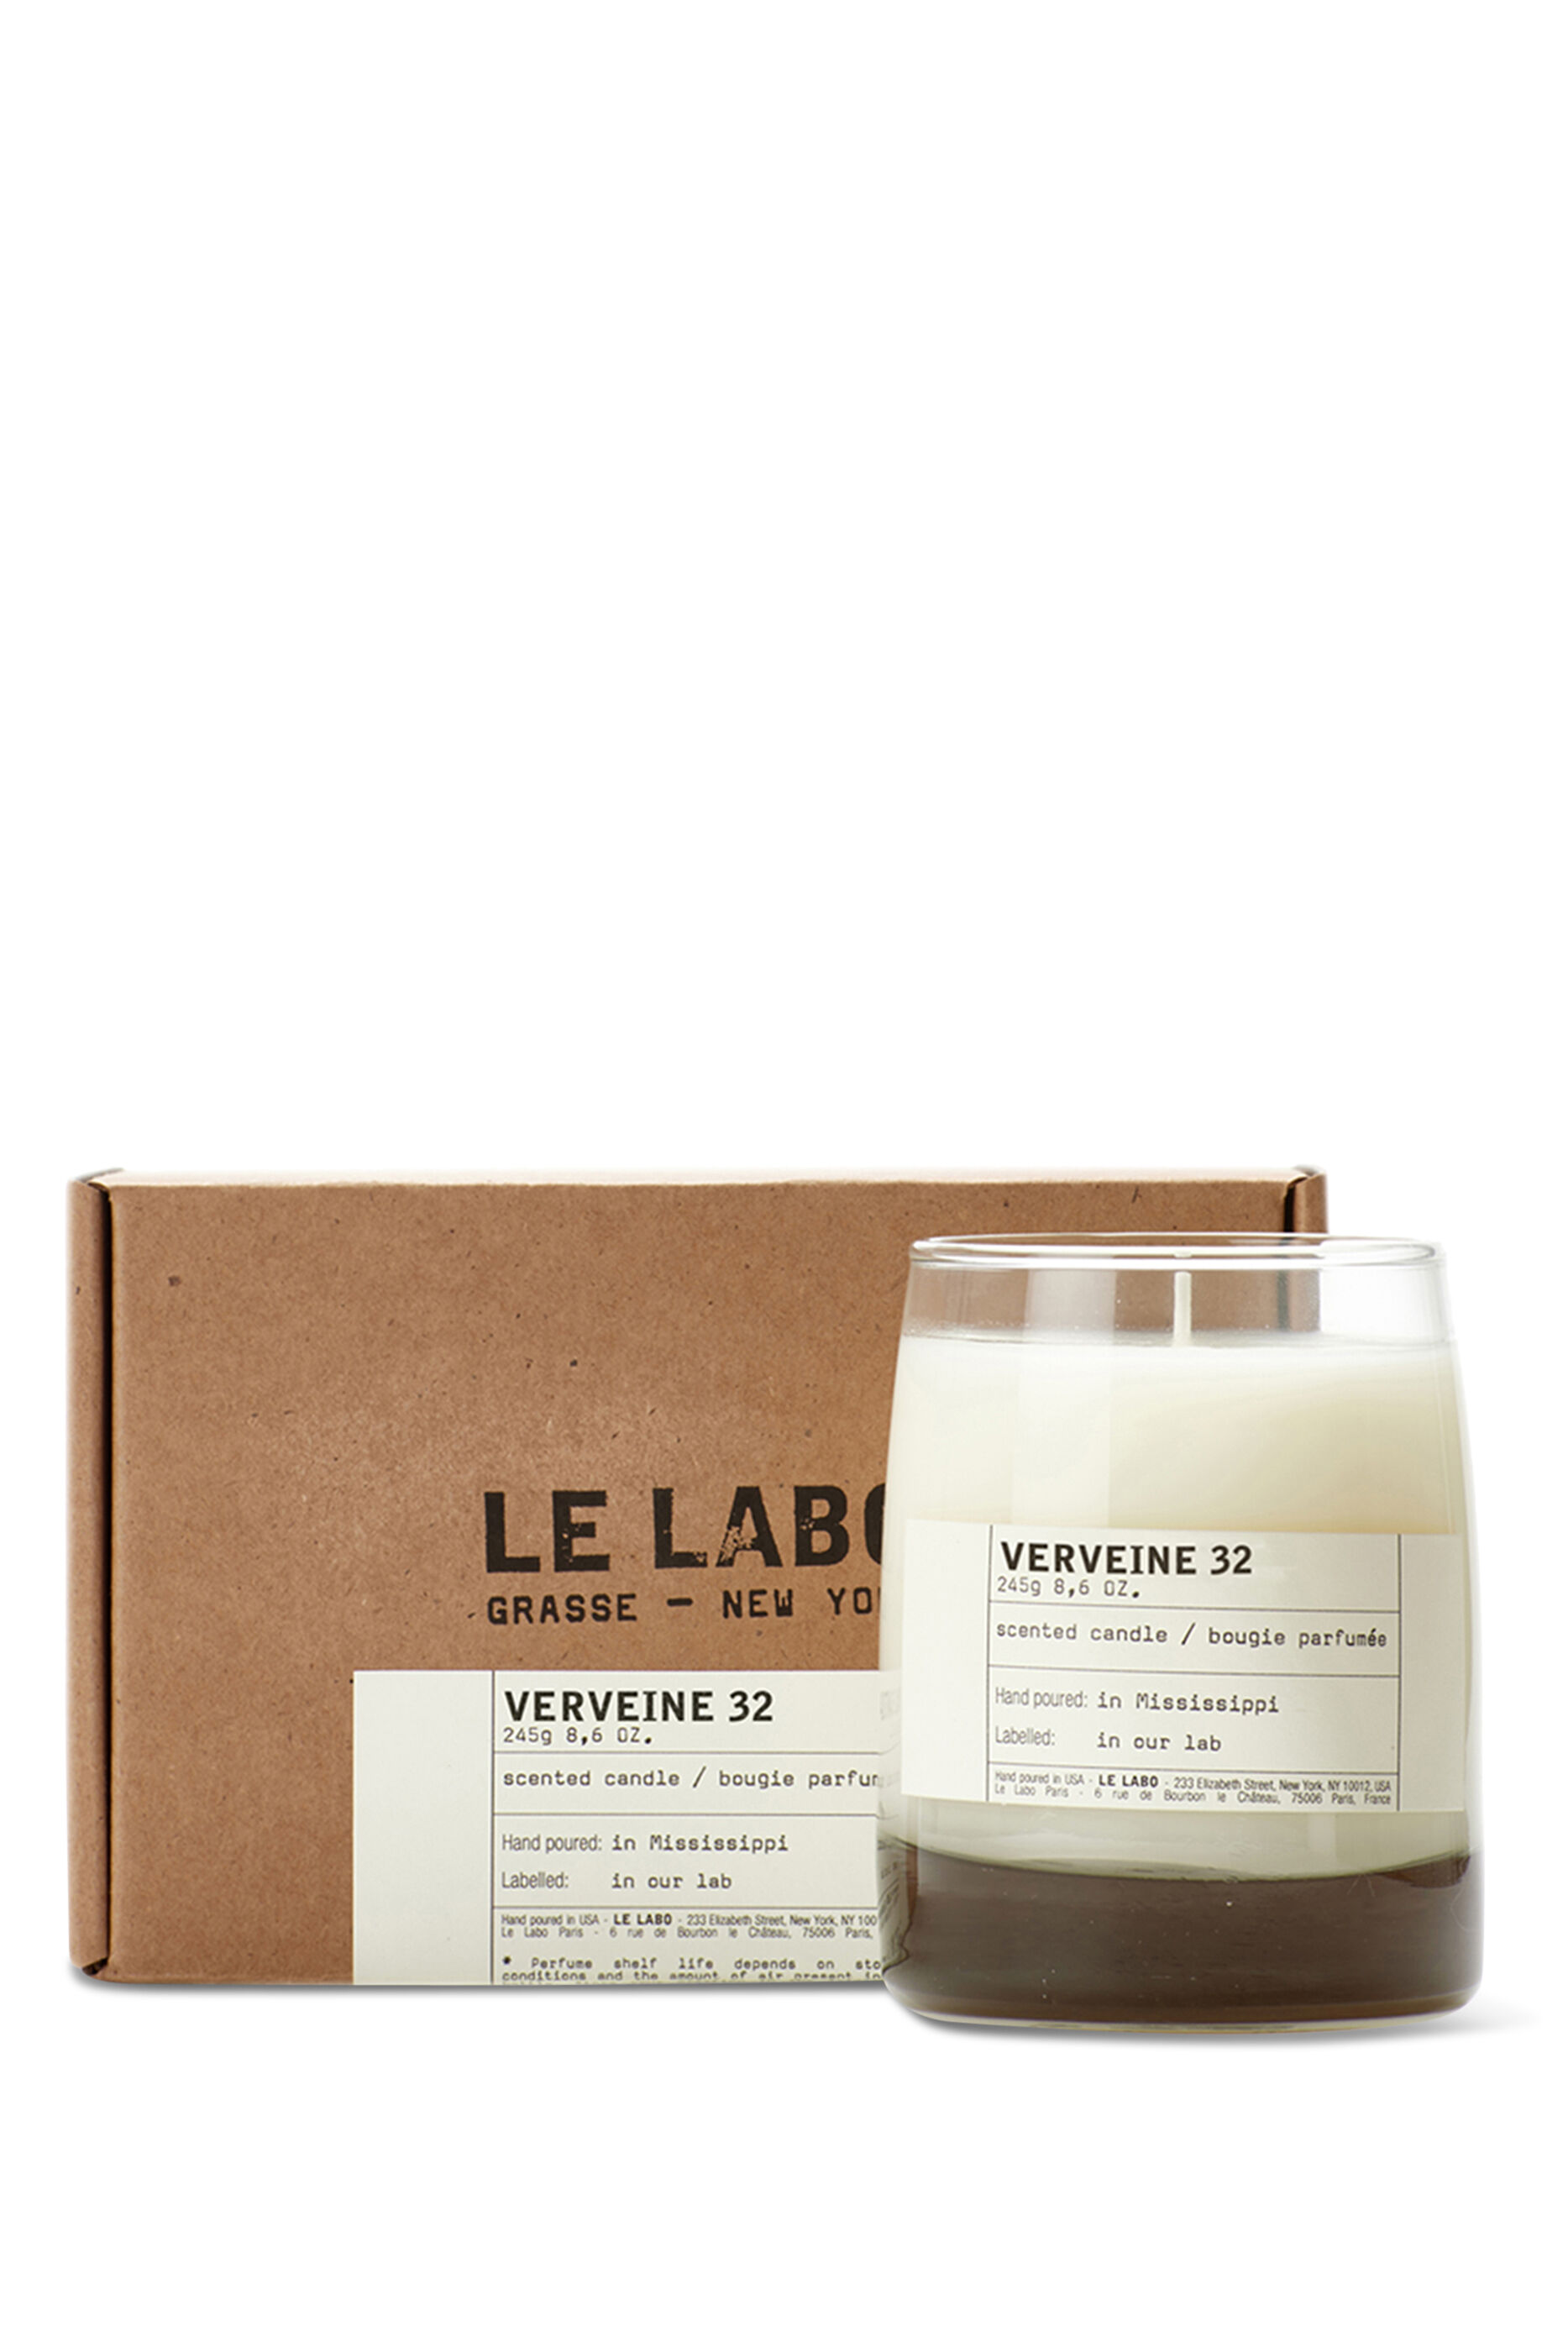 Buy Le Labo Verveine 32 Scented Candle for Unisex | Bloomingdale's Qatar